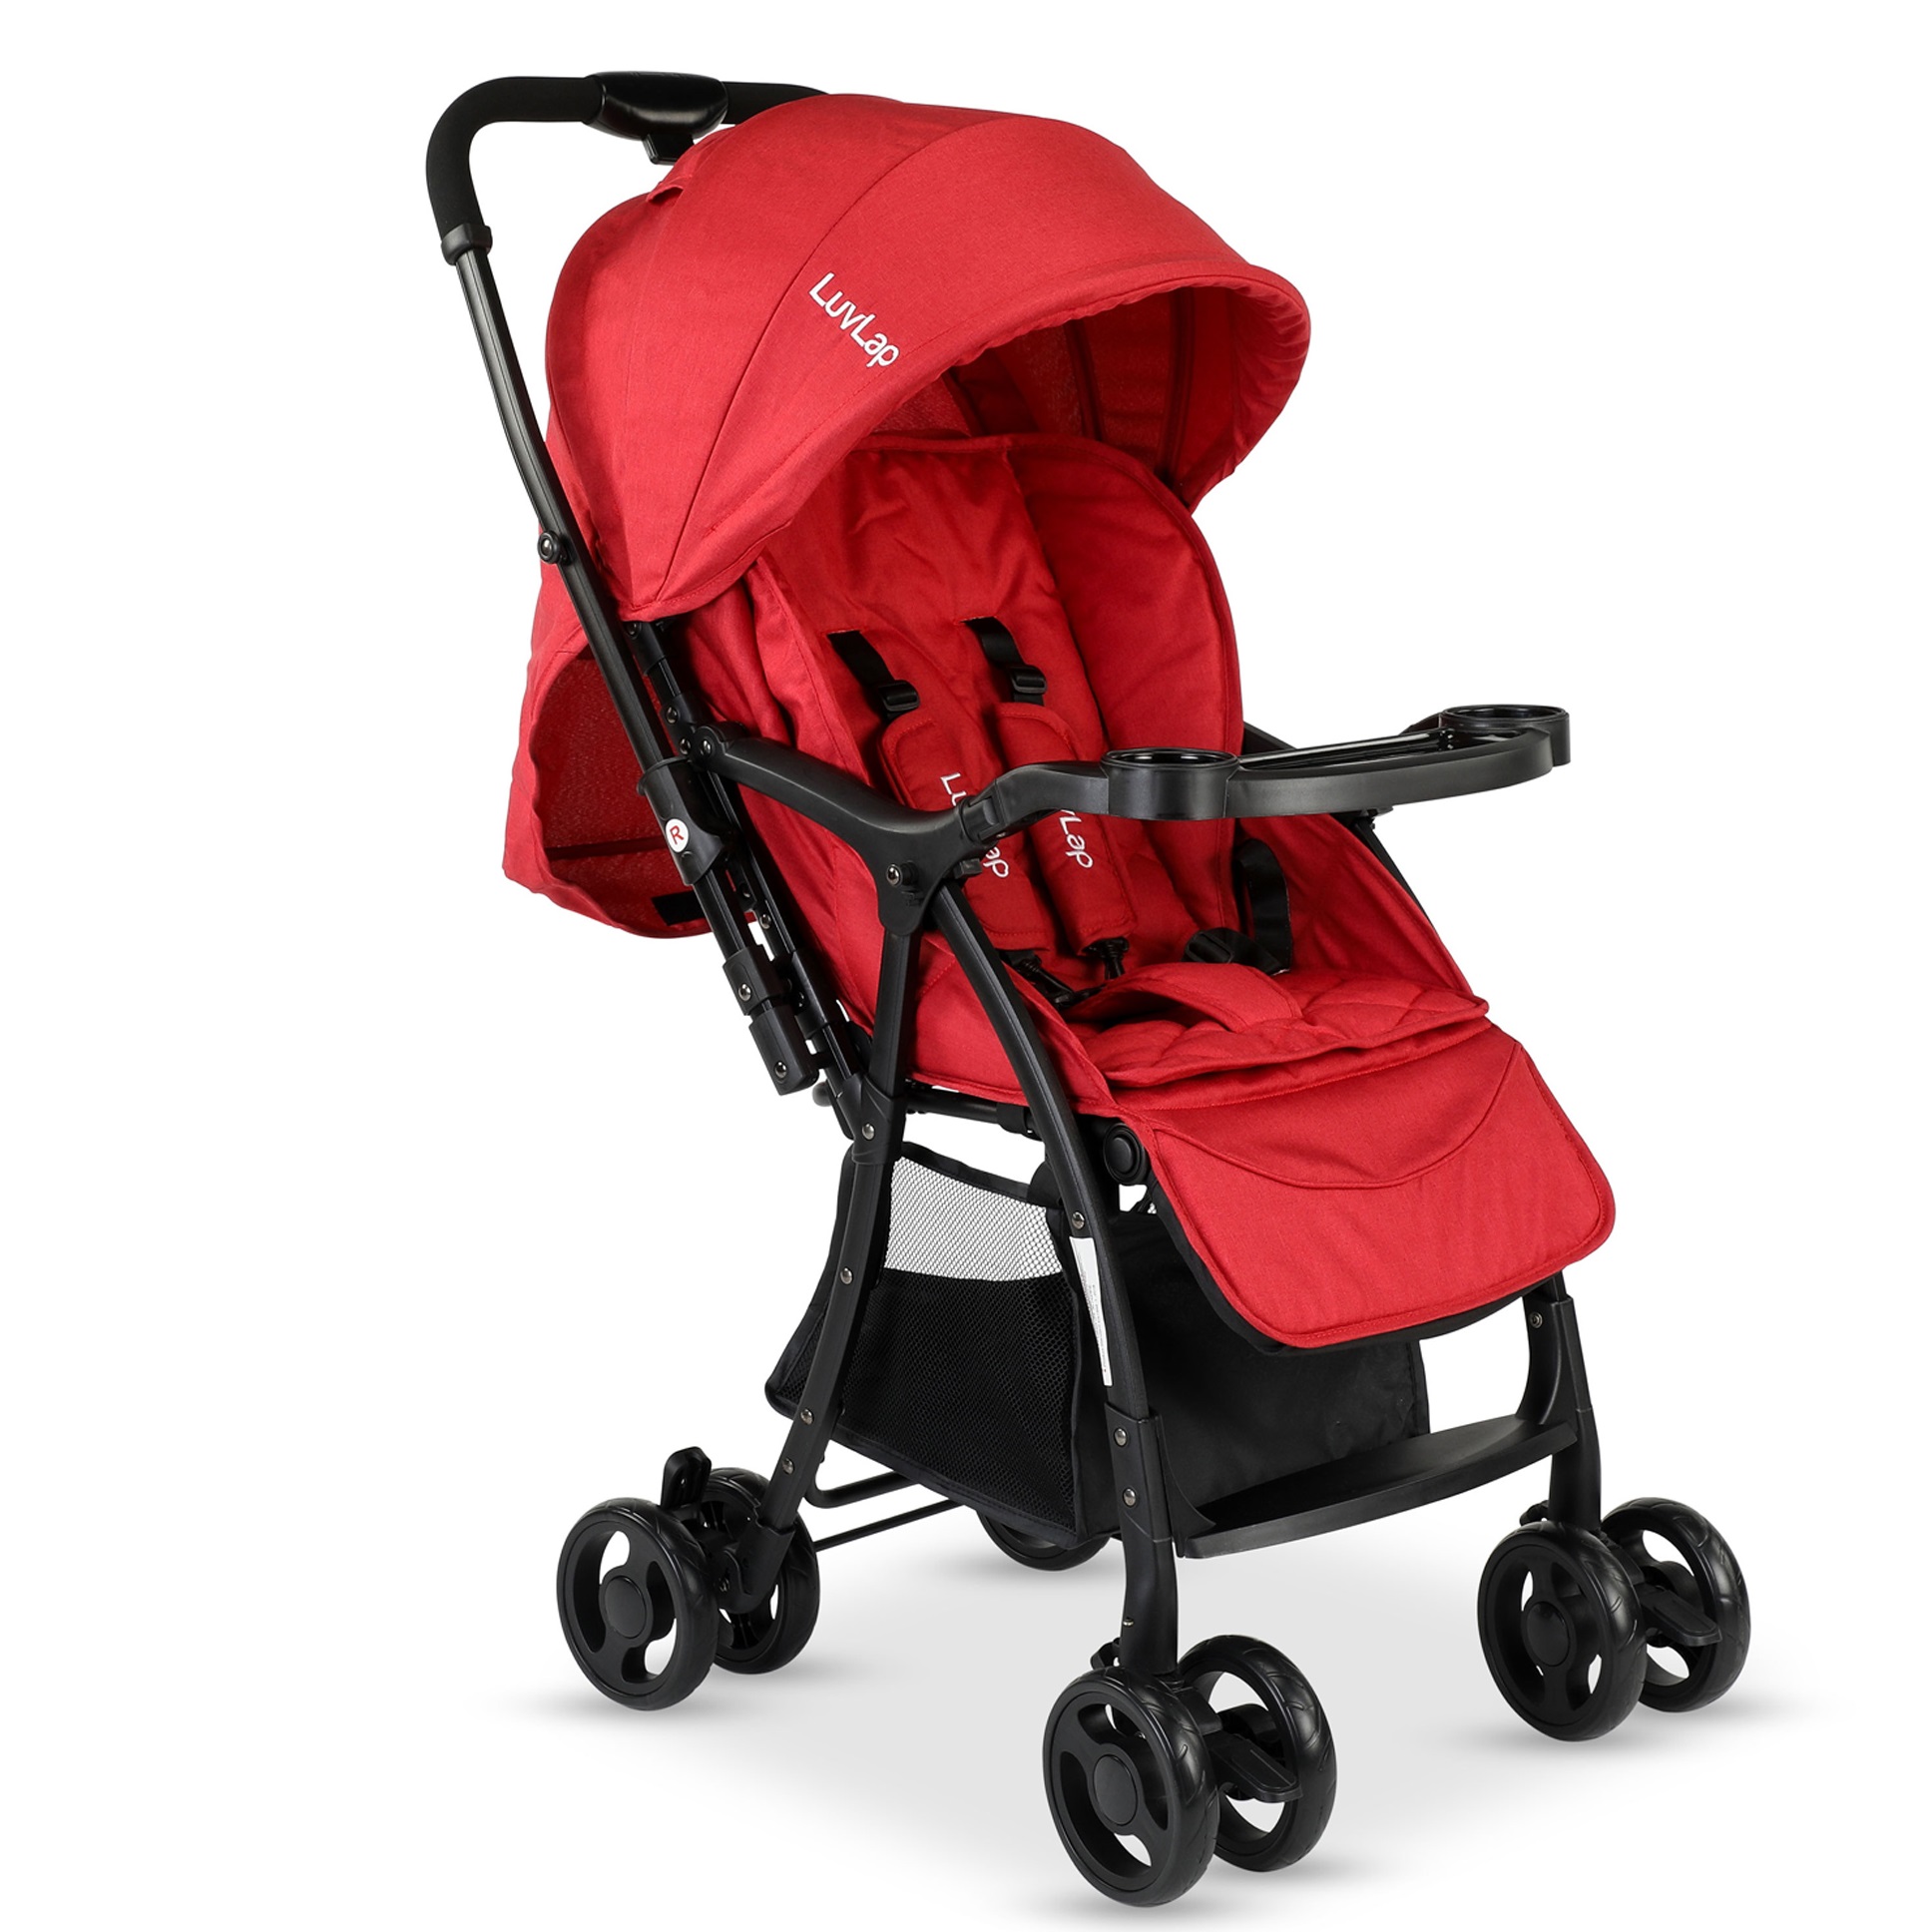 Luv Lap Spark Baby Stroller (Red)